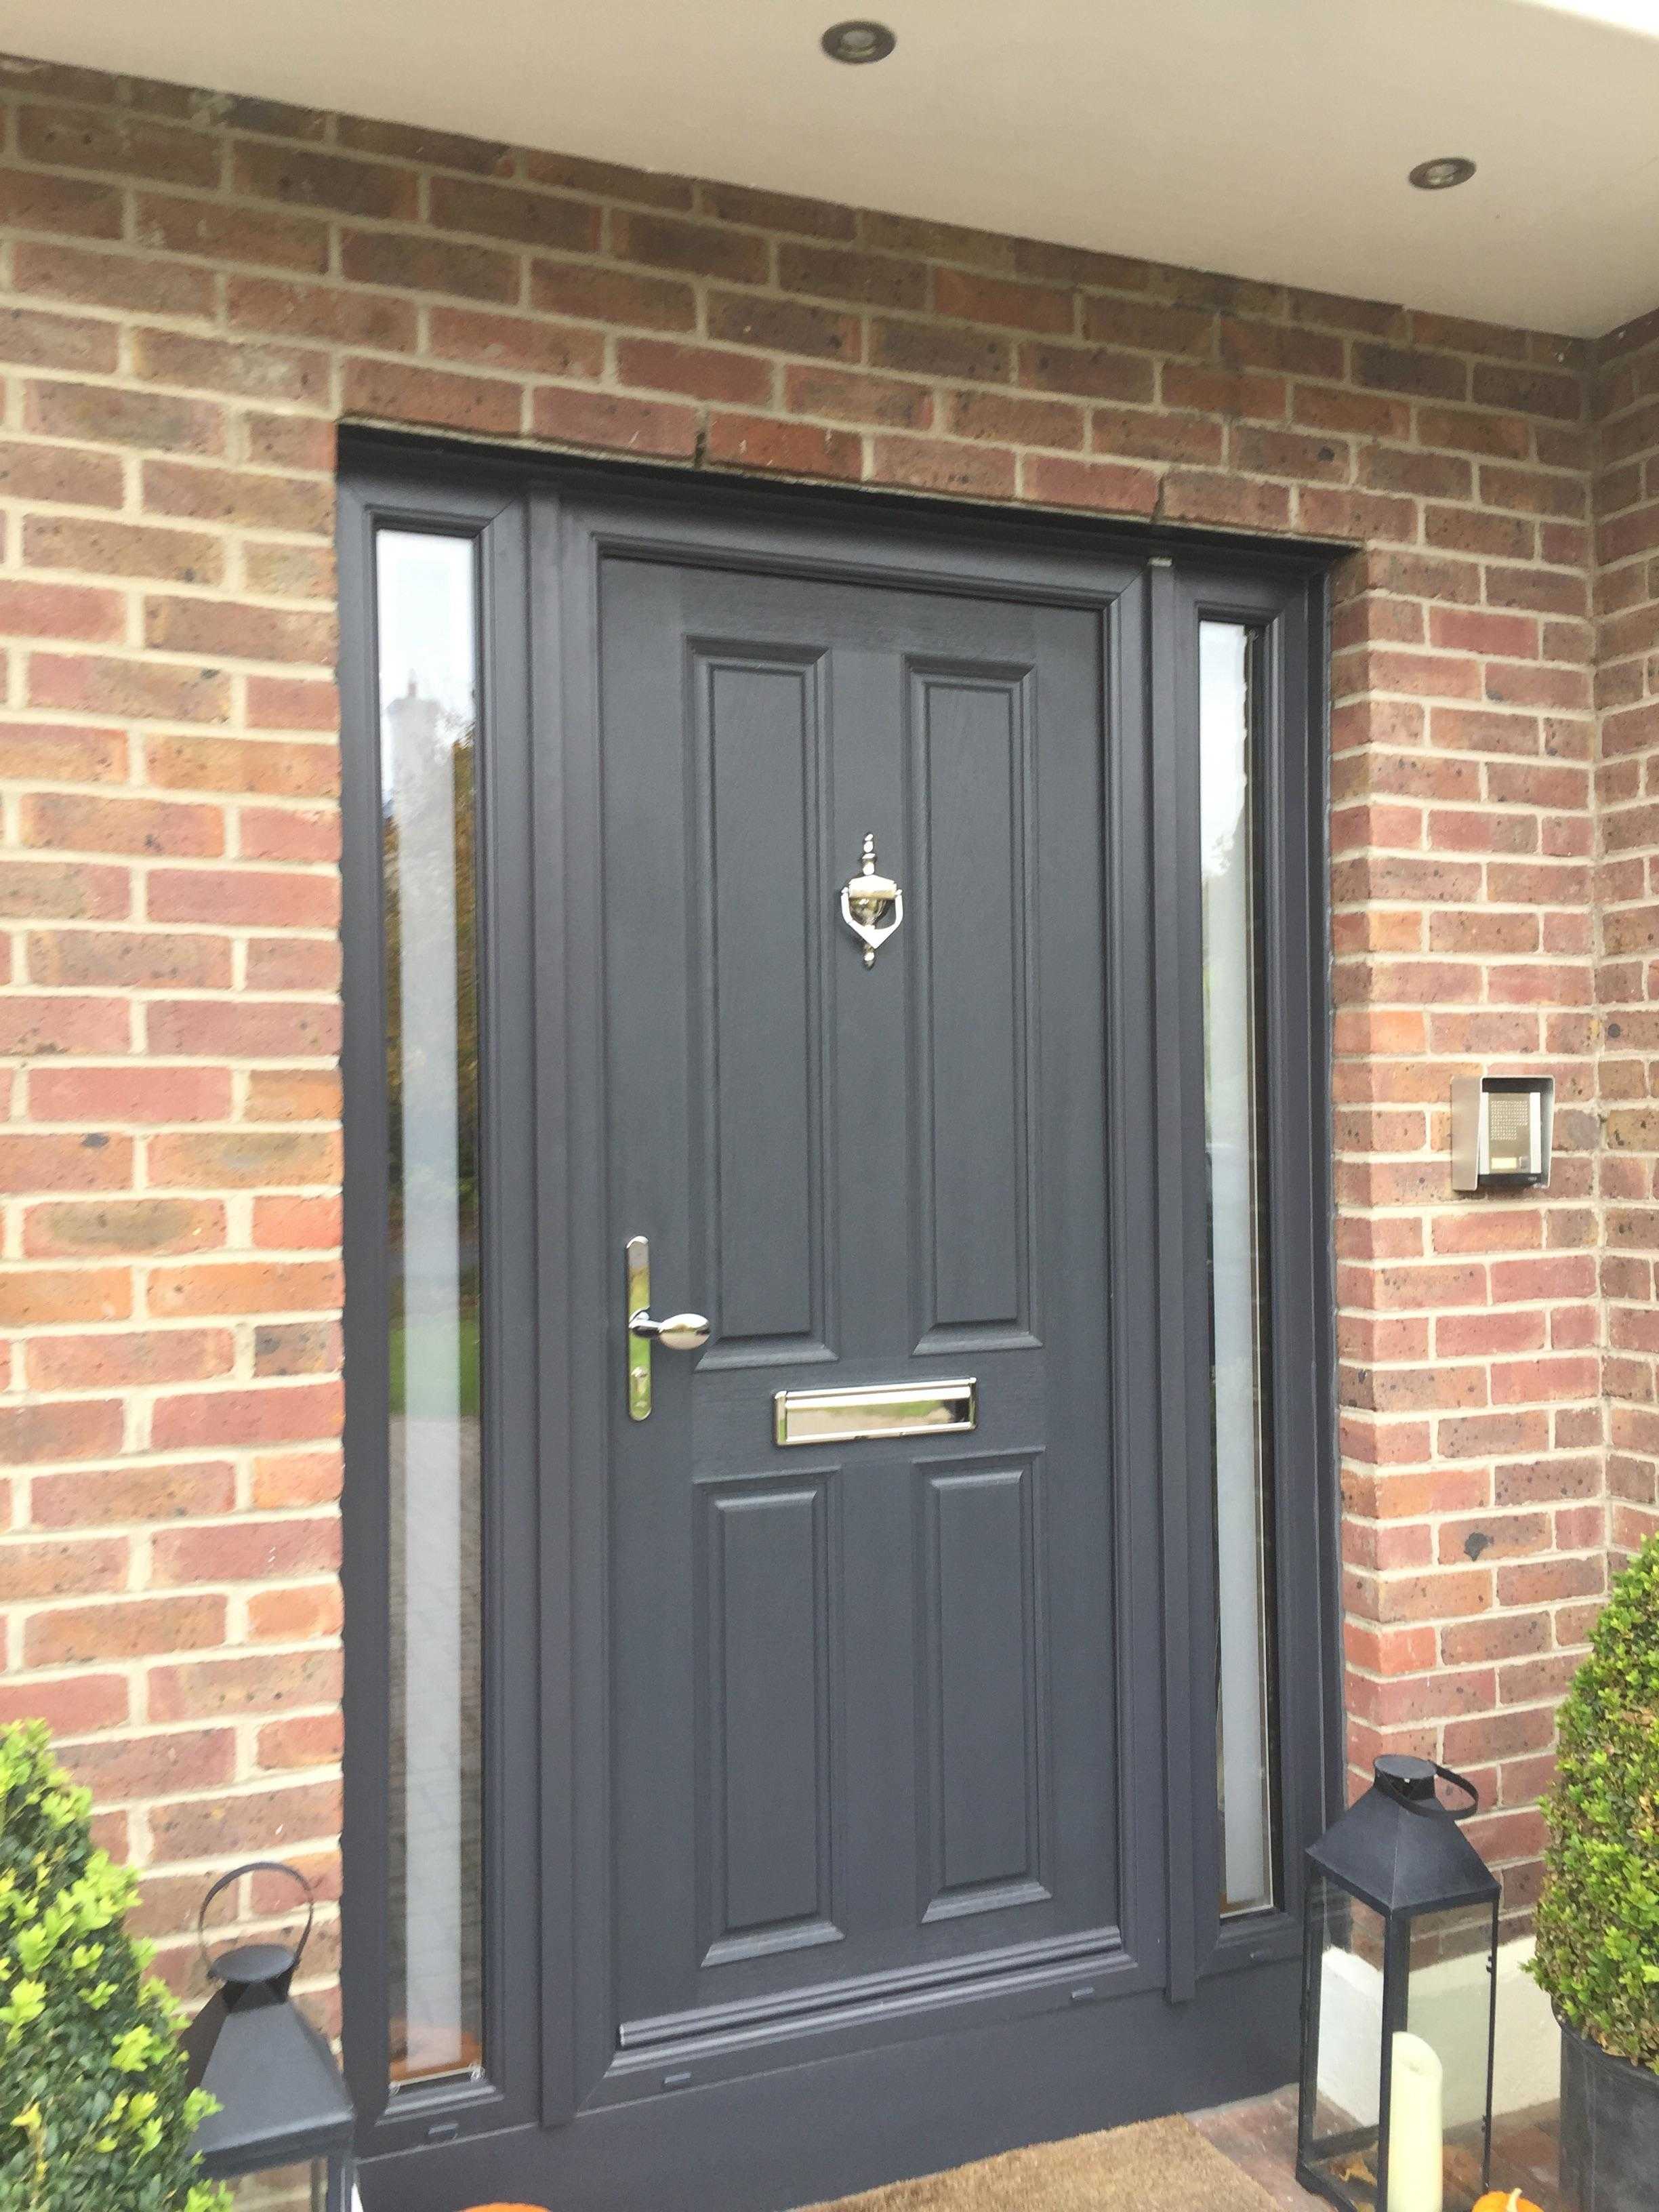 ANTHRACITE GREY APEER APM1 COMPOSITE FRONT DOOR FITTED BY ASGARD WINDOWS DUBLIN.